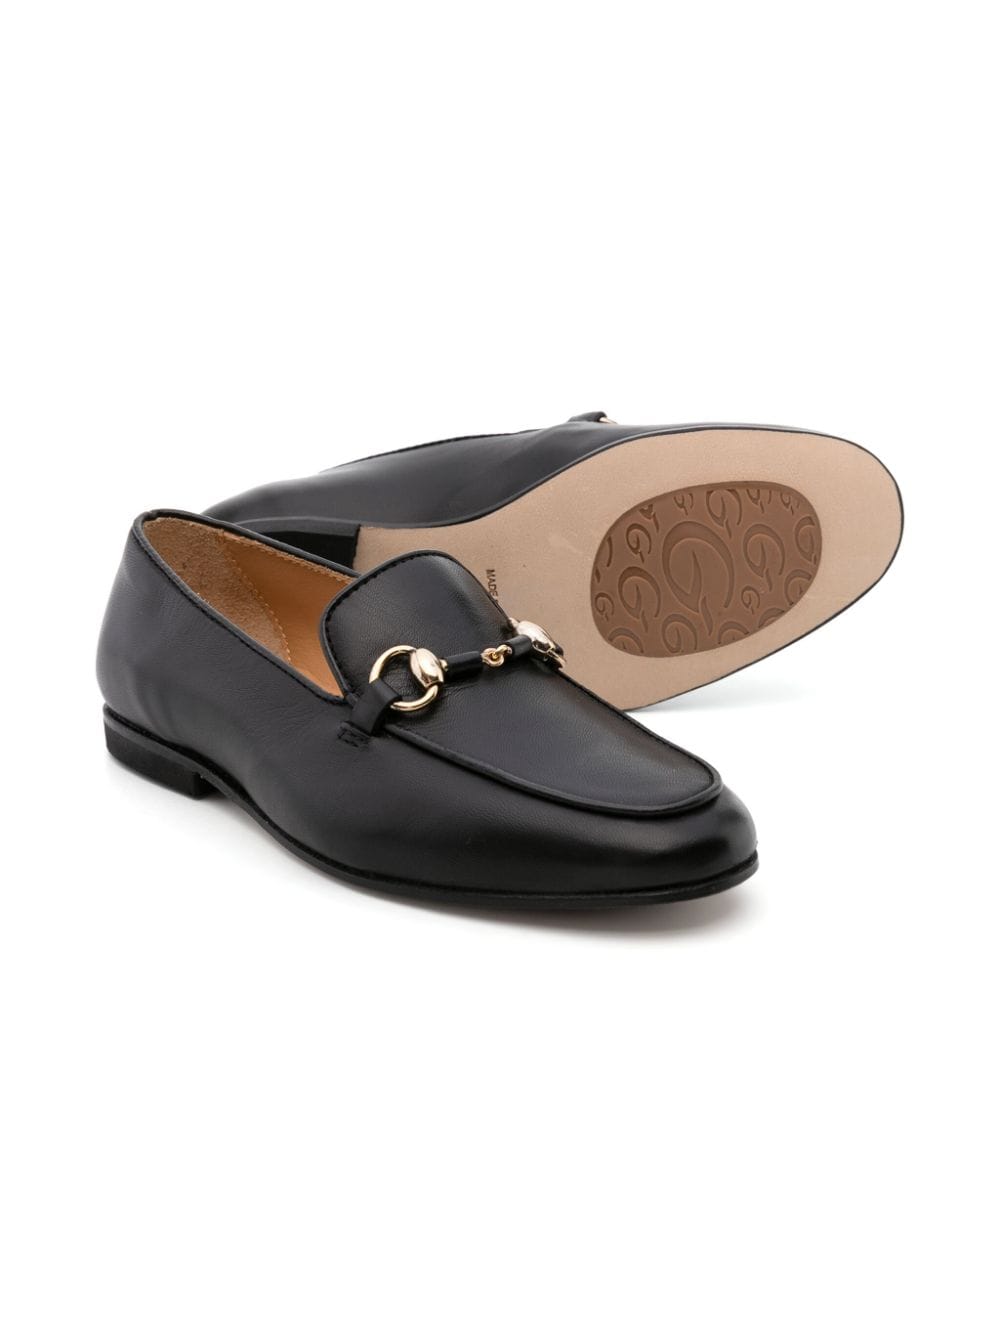 Image 2 of Gallucci Kids horsebit-detail leather loafers